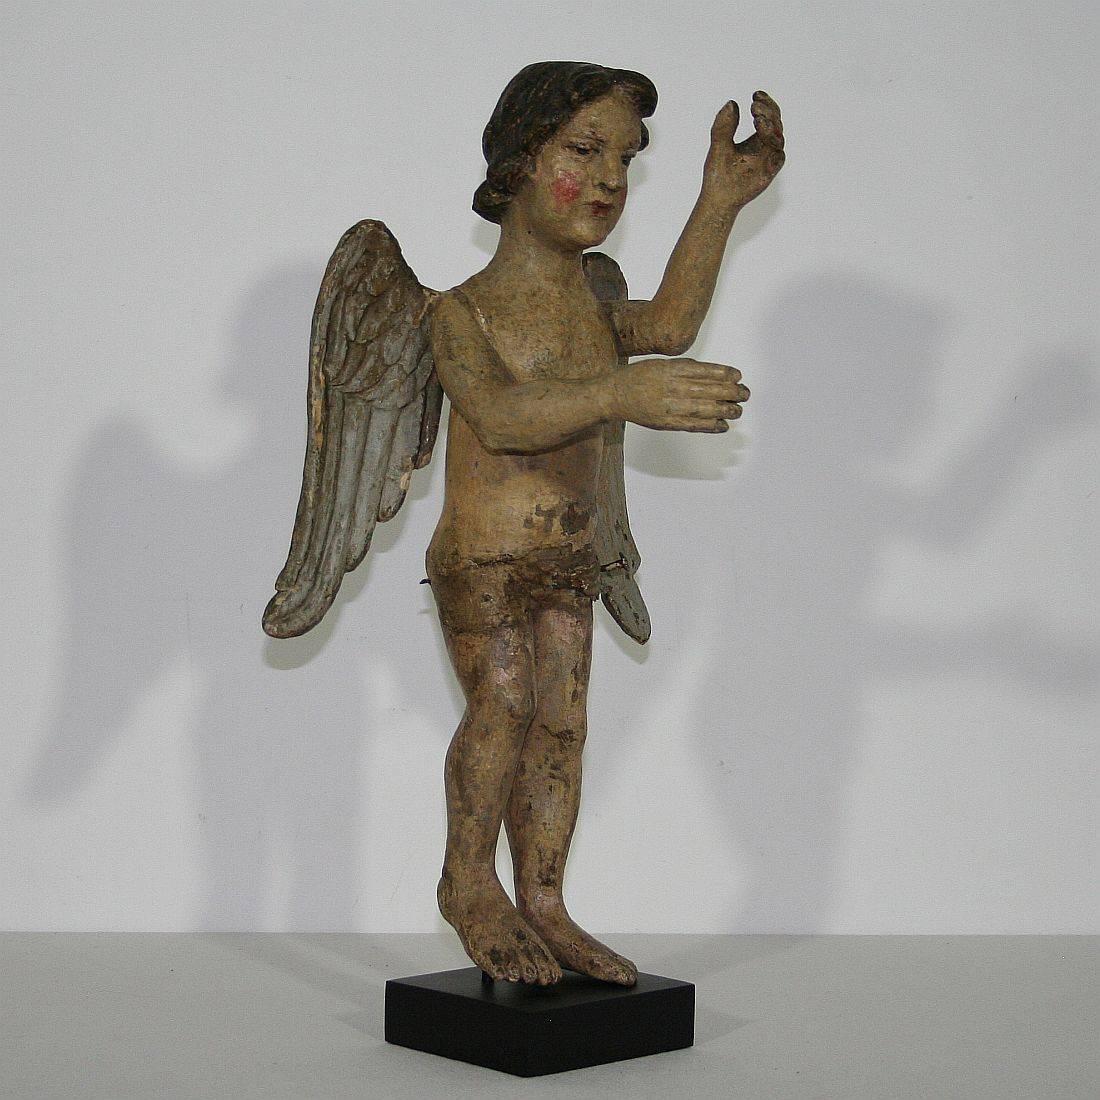 Very nice Folk Art standing angel with its original color and great expression
France, circa 1750
Weathered, small losses and old repairs
Measurement is with the wooden base.
More pictures are available on request.